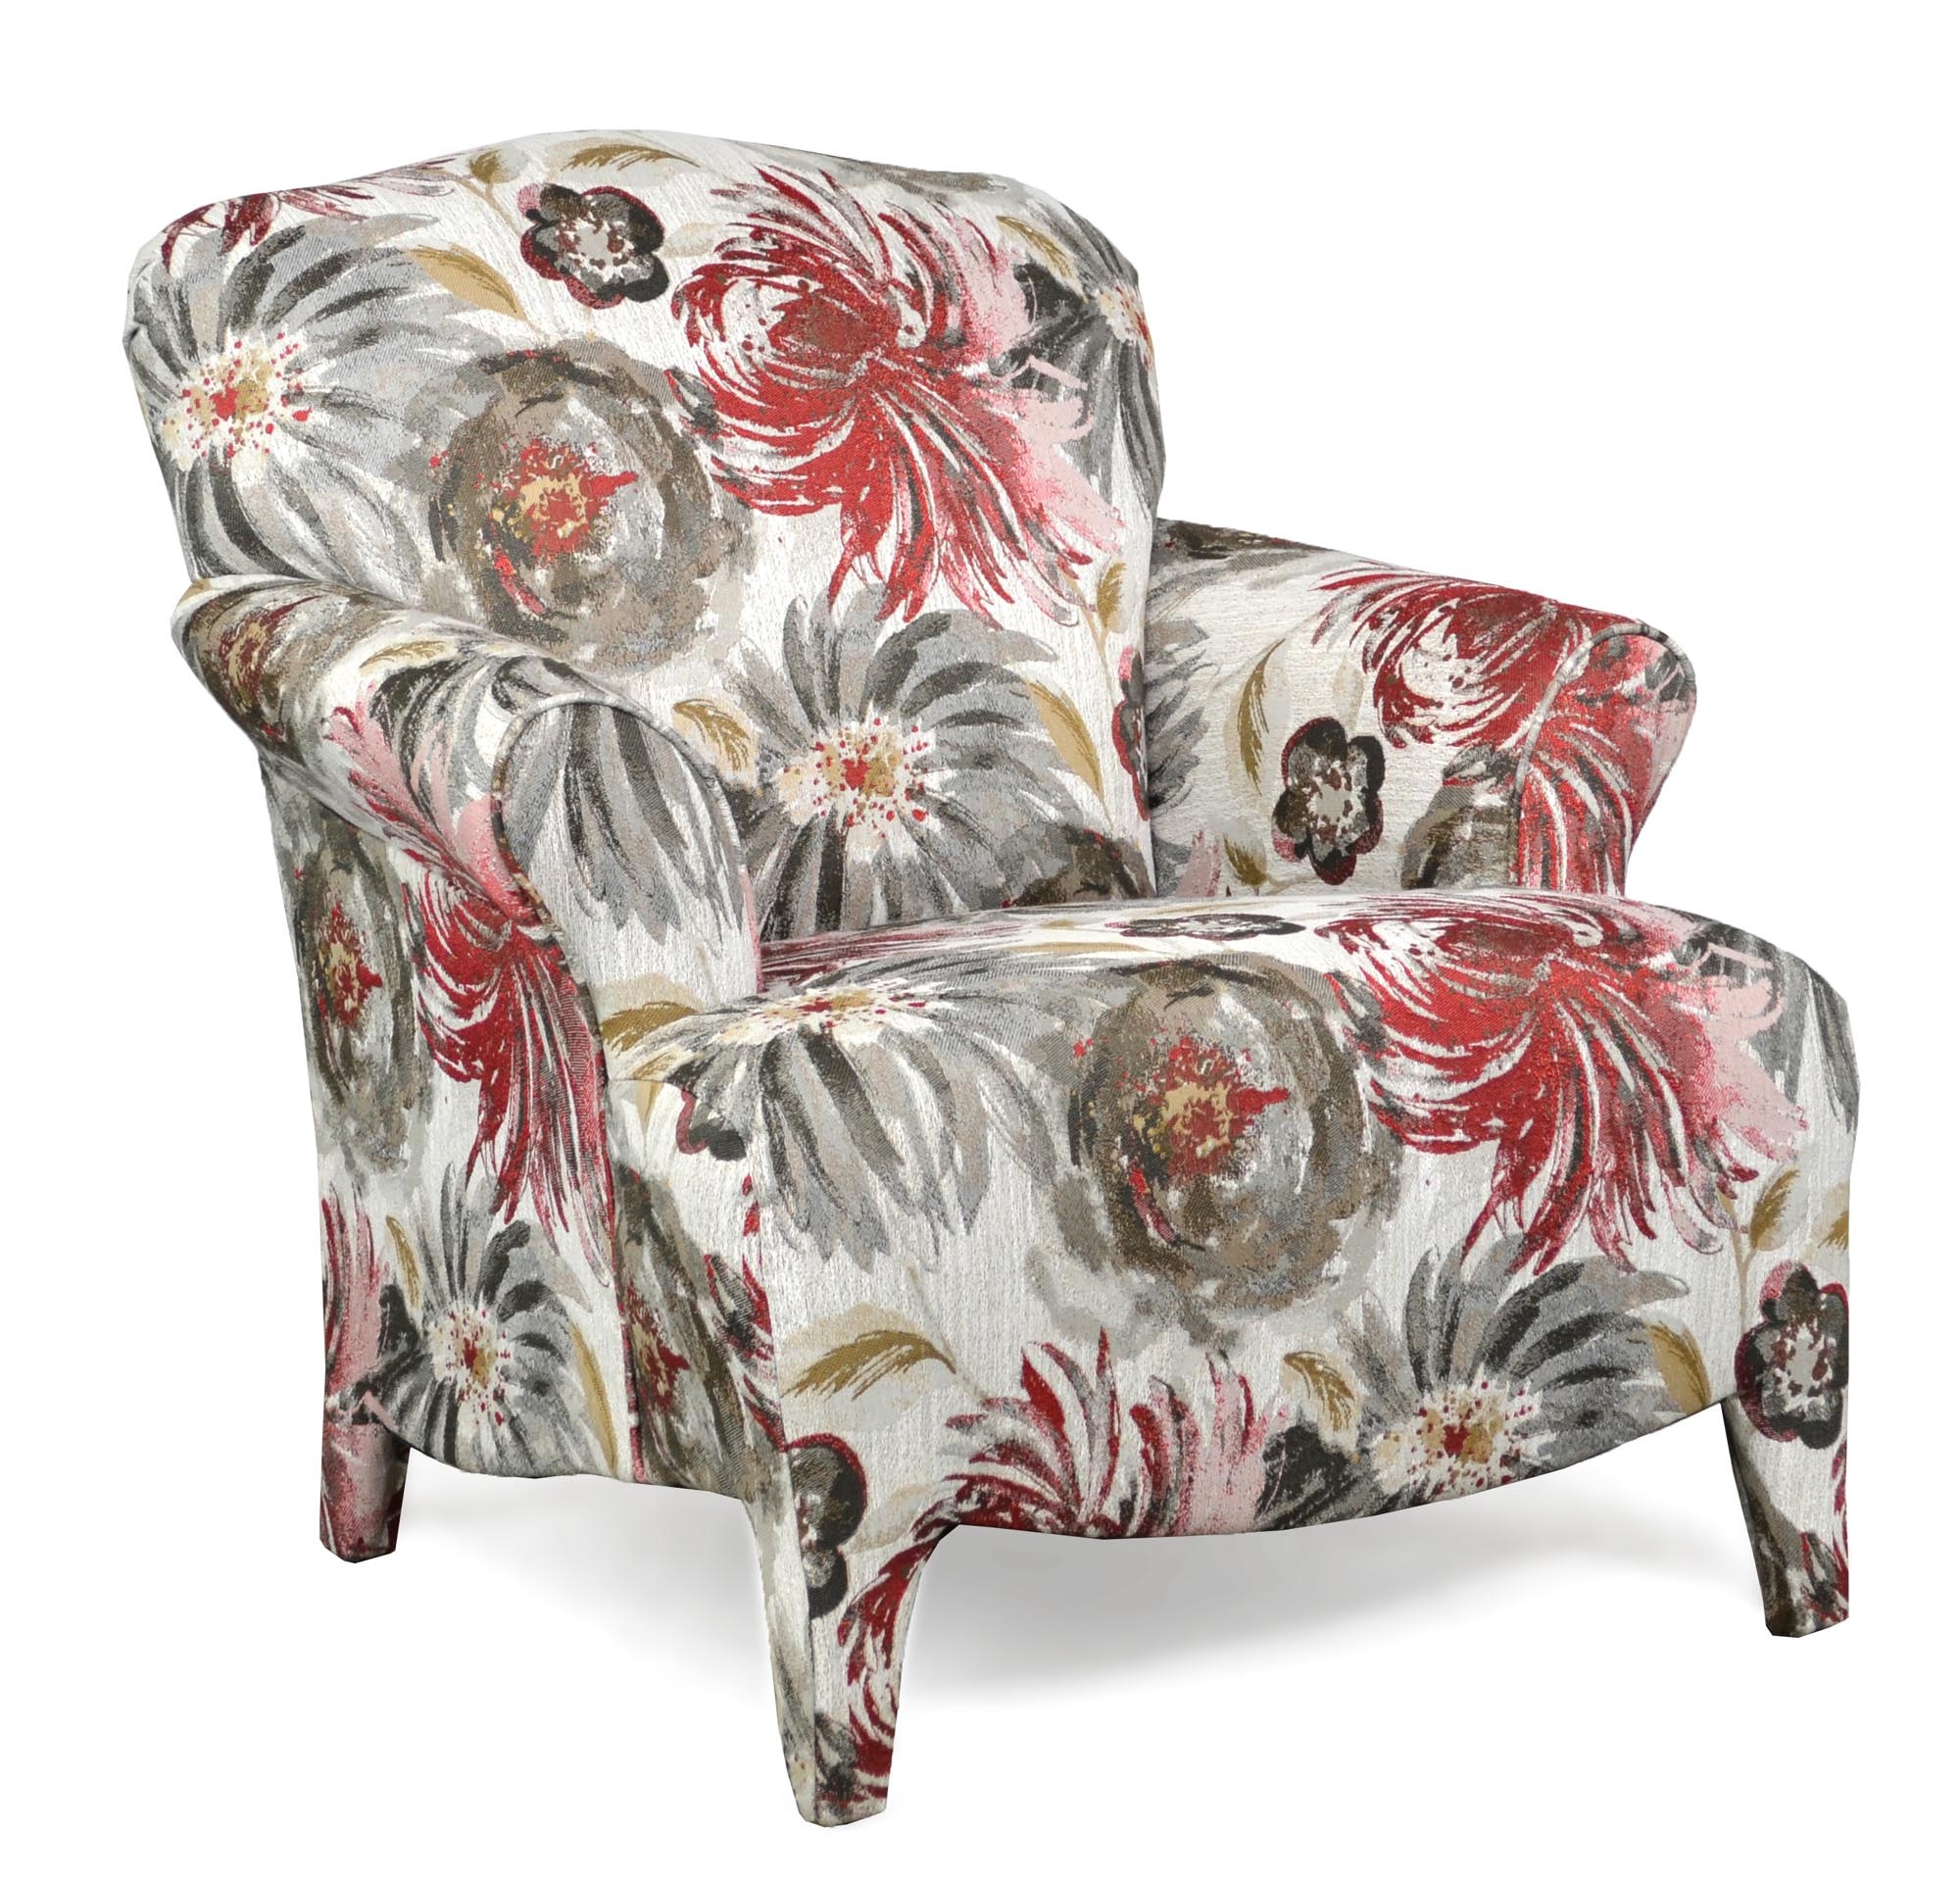 Furniture Clearance Center - Accent Chairs